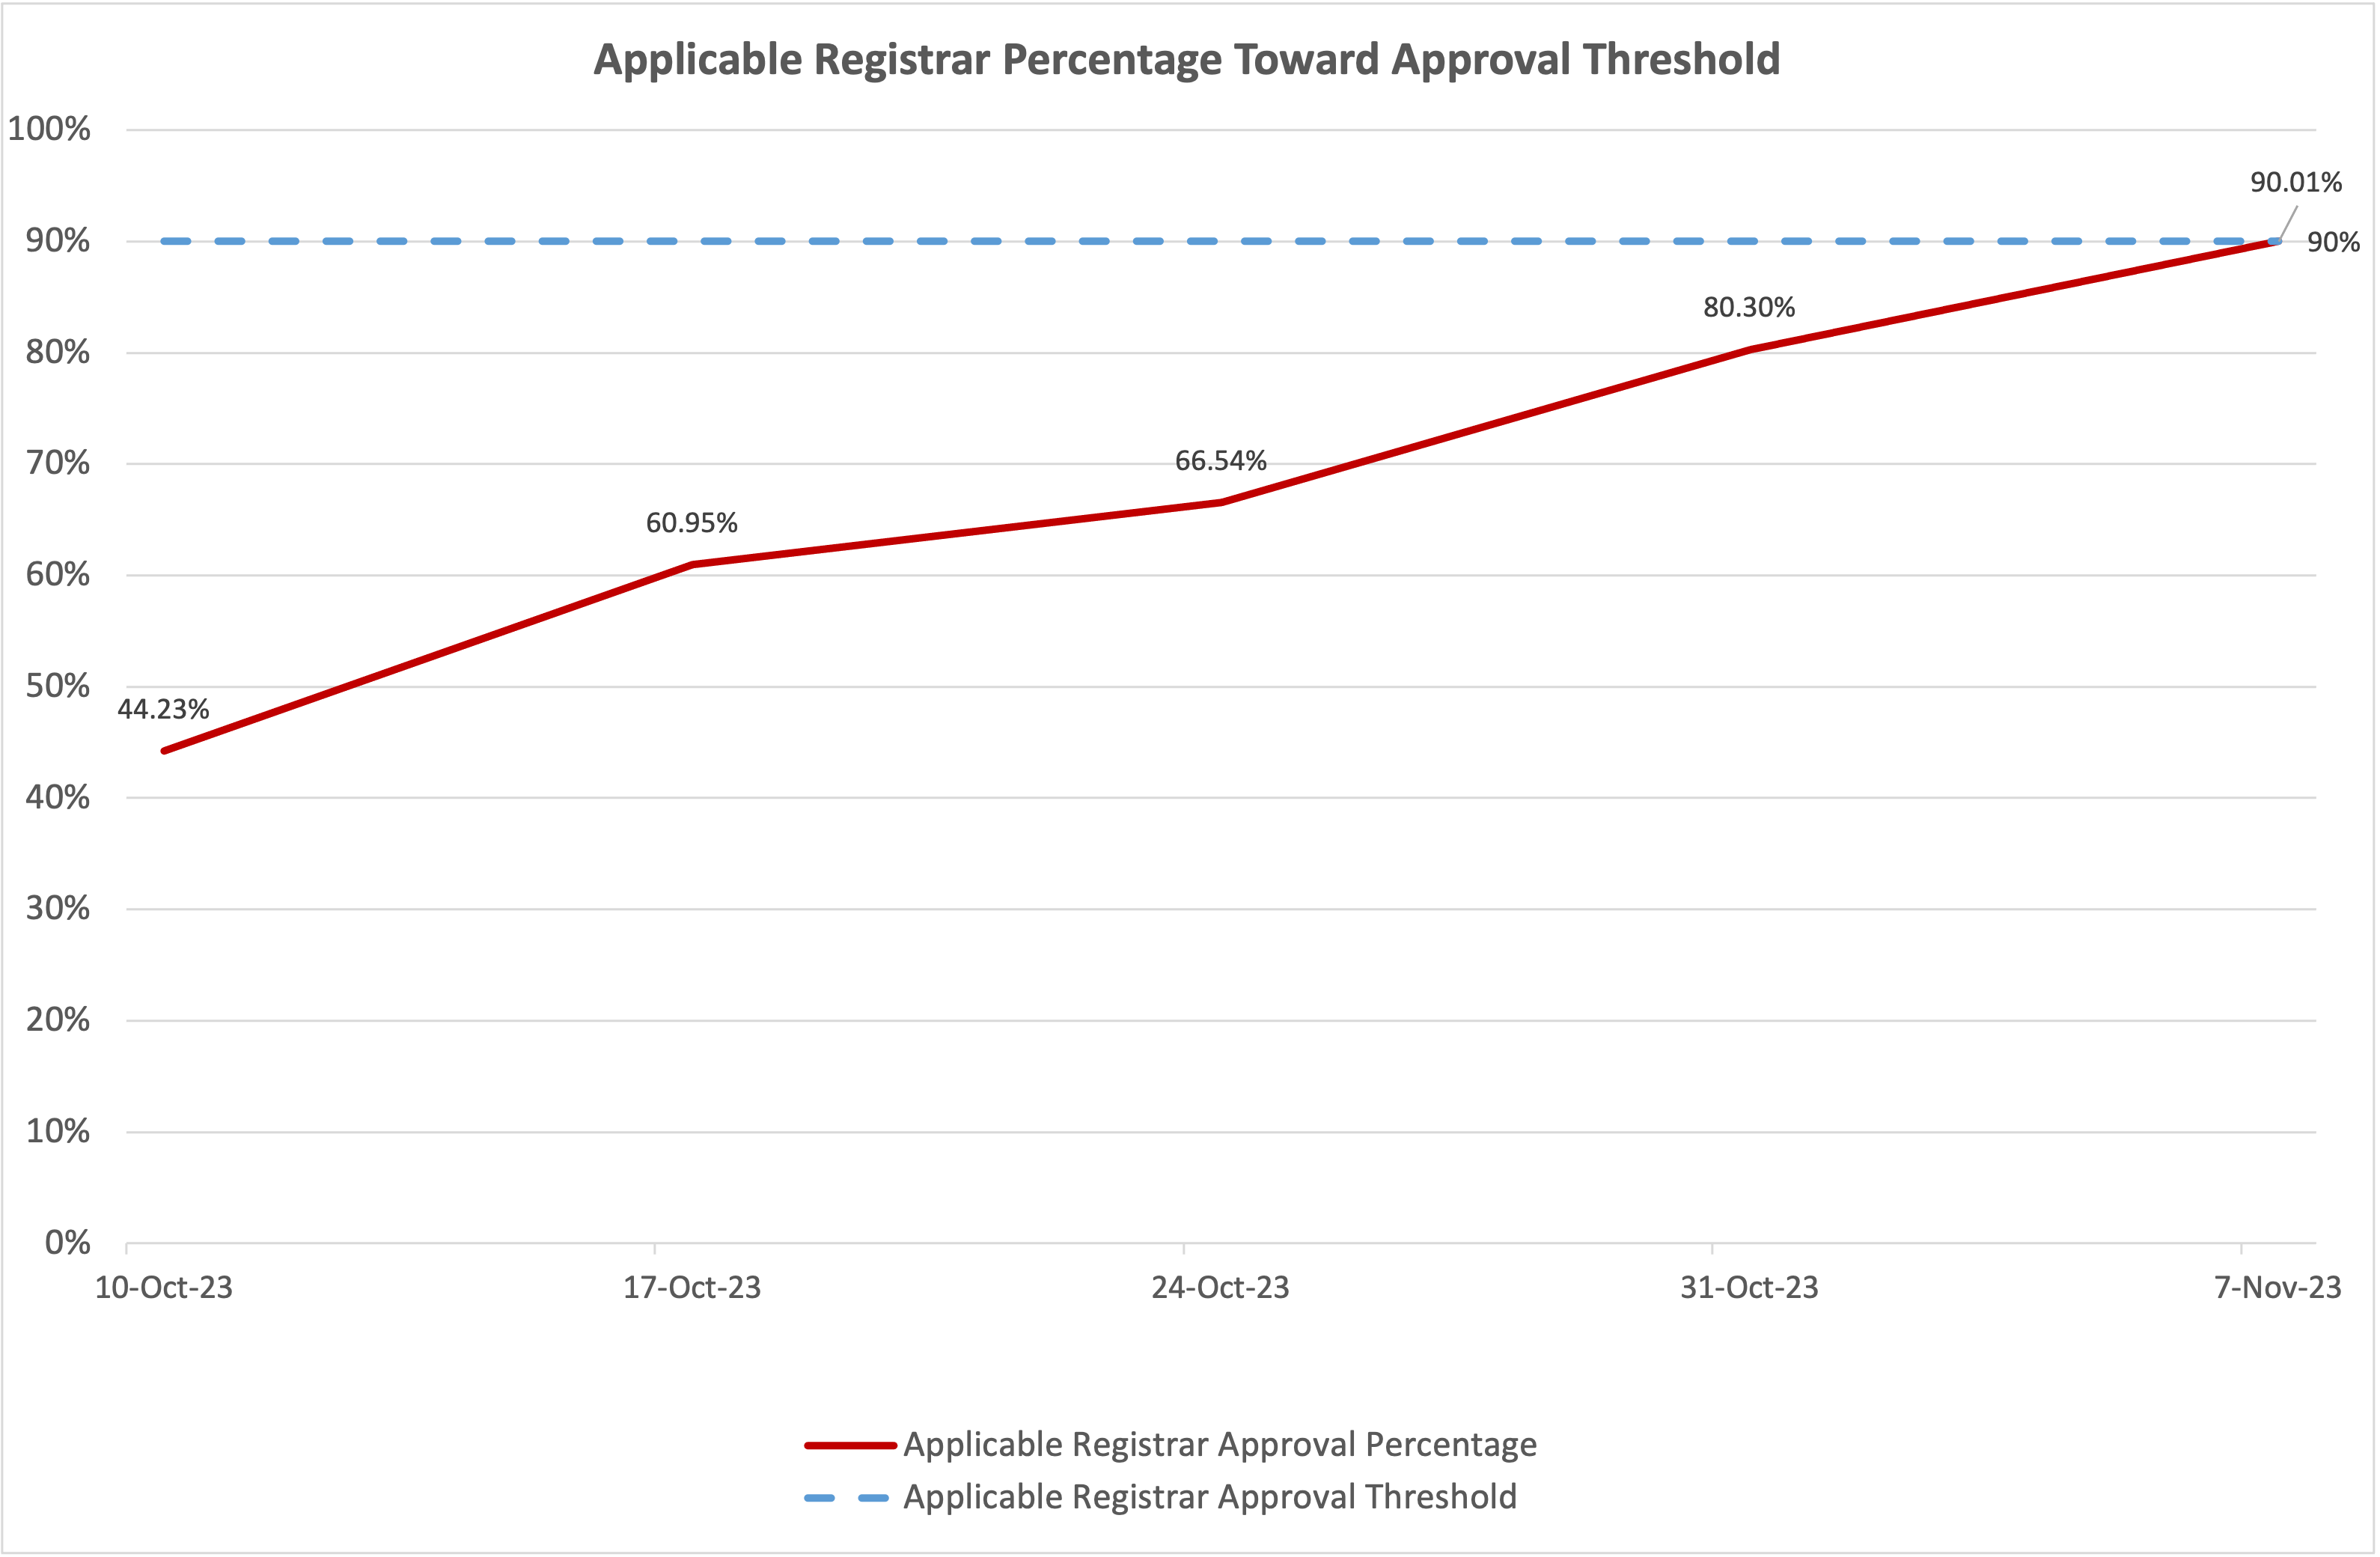 Line chart of the progress of the vote over time towards the affirmative approval of the percentage of total domain names under management (TDUMs) threshold for Applicable Registrars. The TDUMs approval threshold is 90%. As of the 7th of November 2023, the affirmative votes towards the threshold is 90.01%.